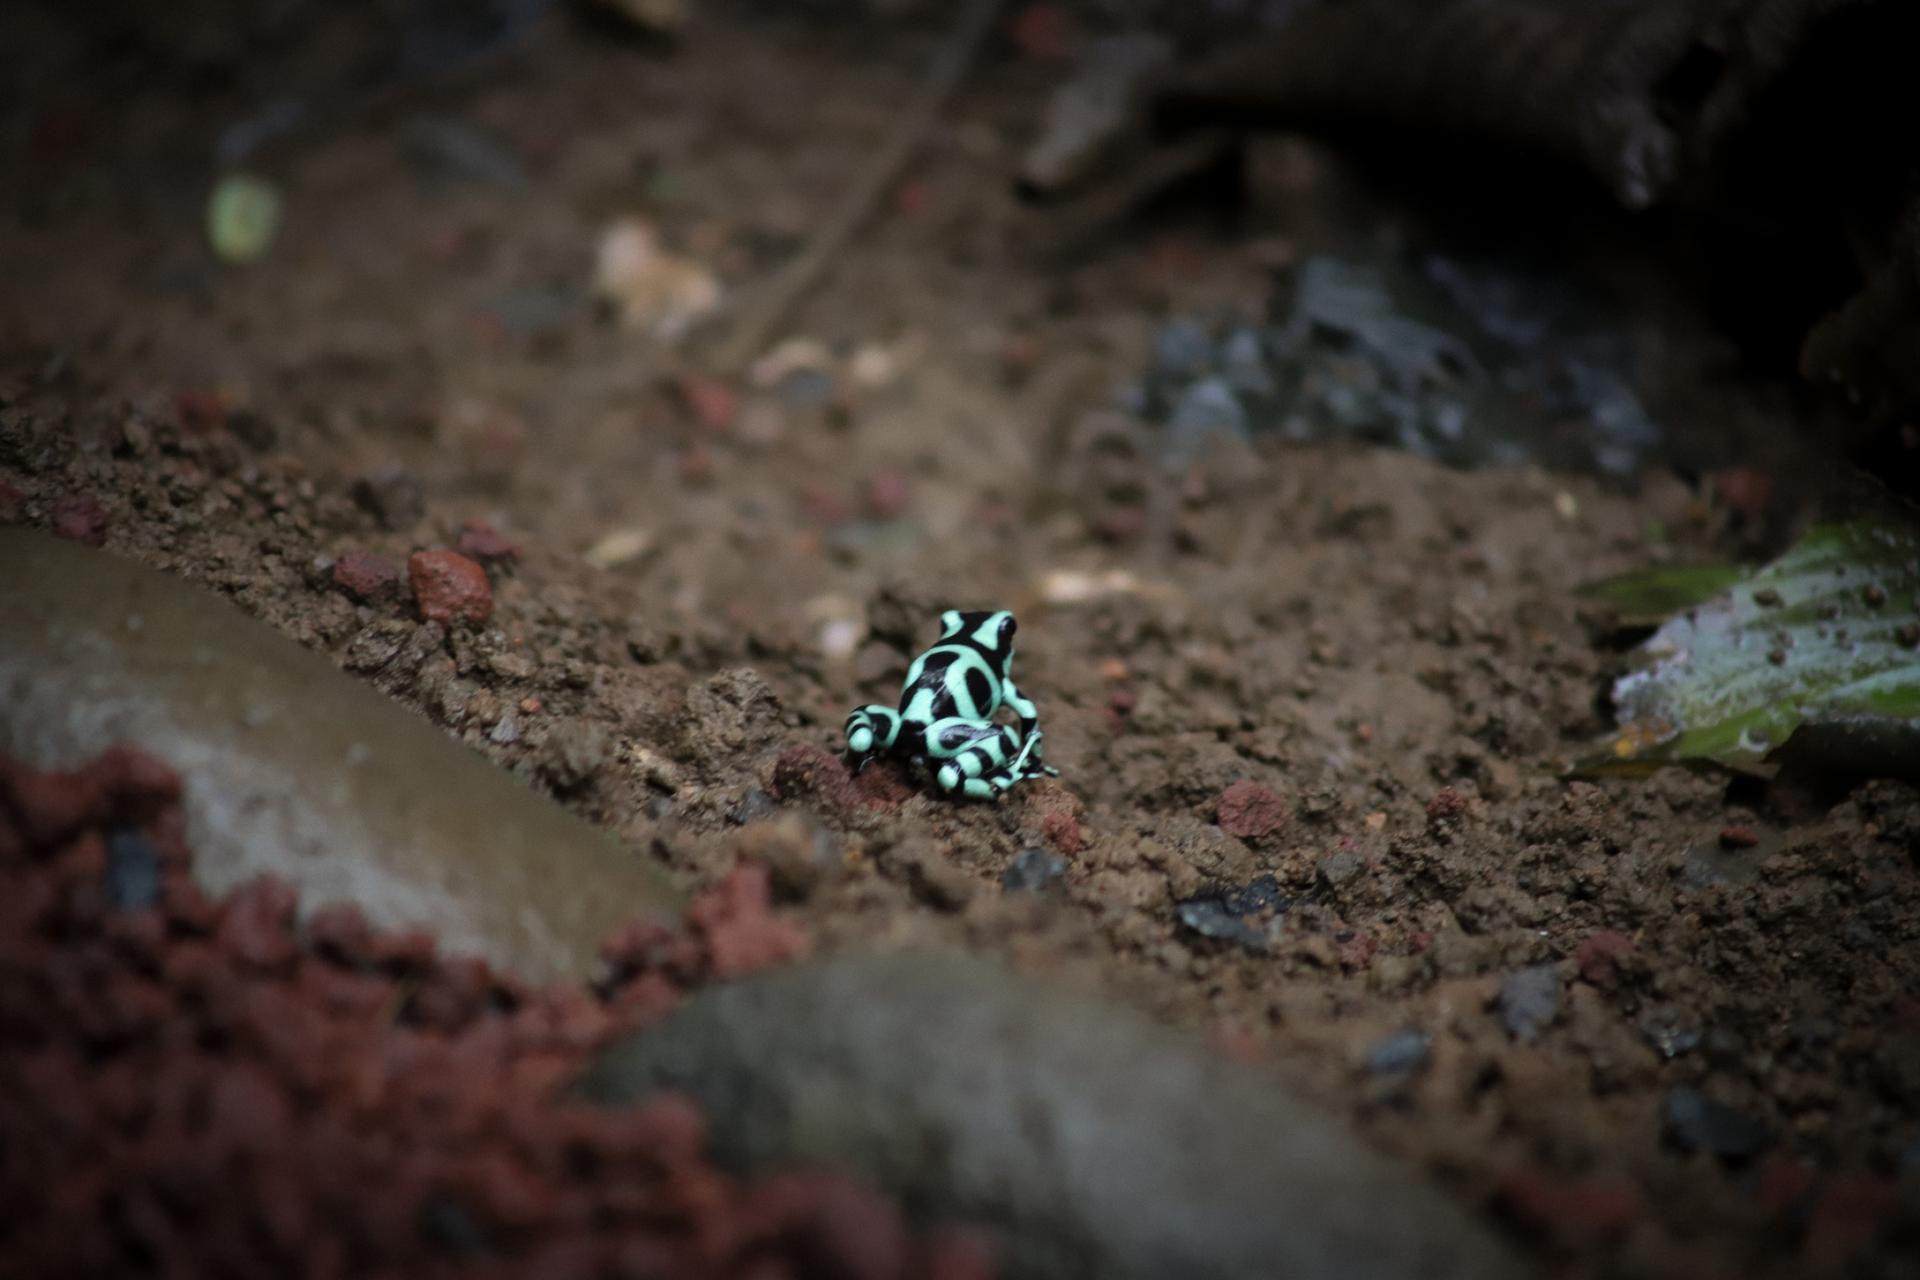 A poison dart frog in Costa Rica.